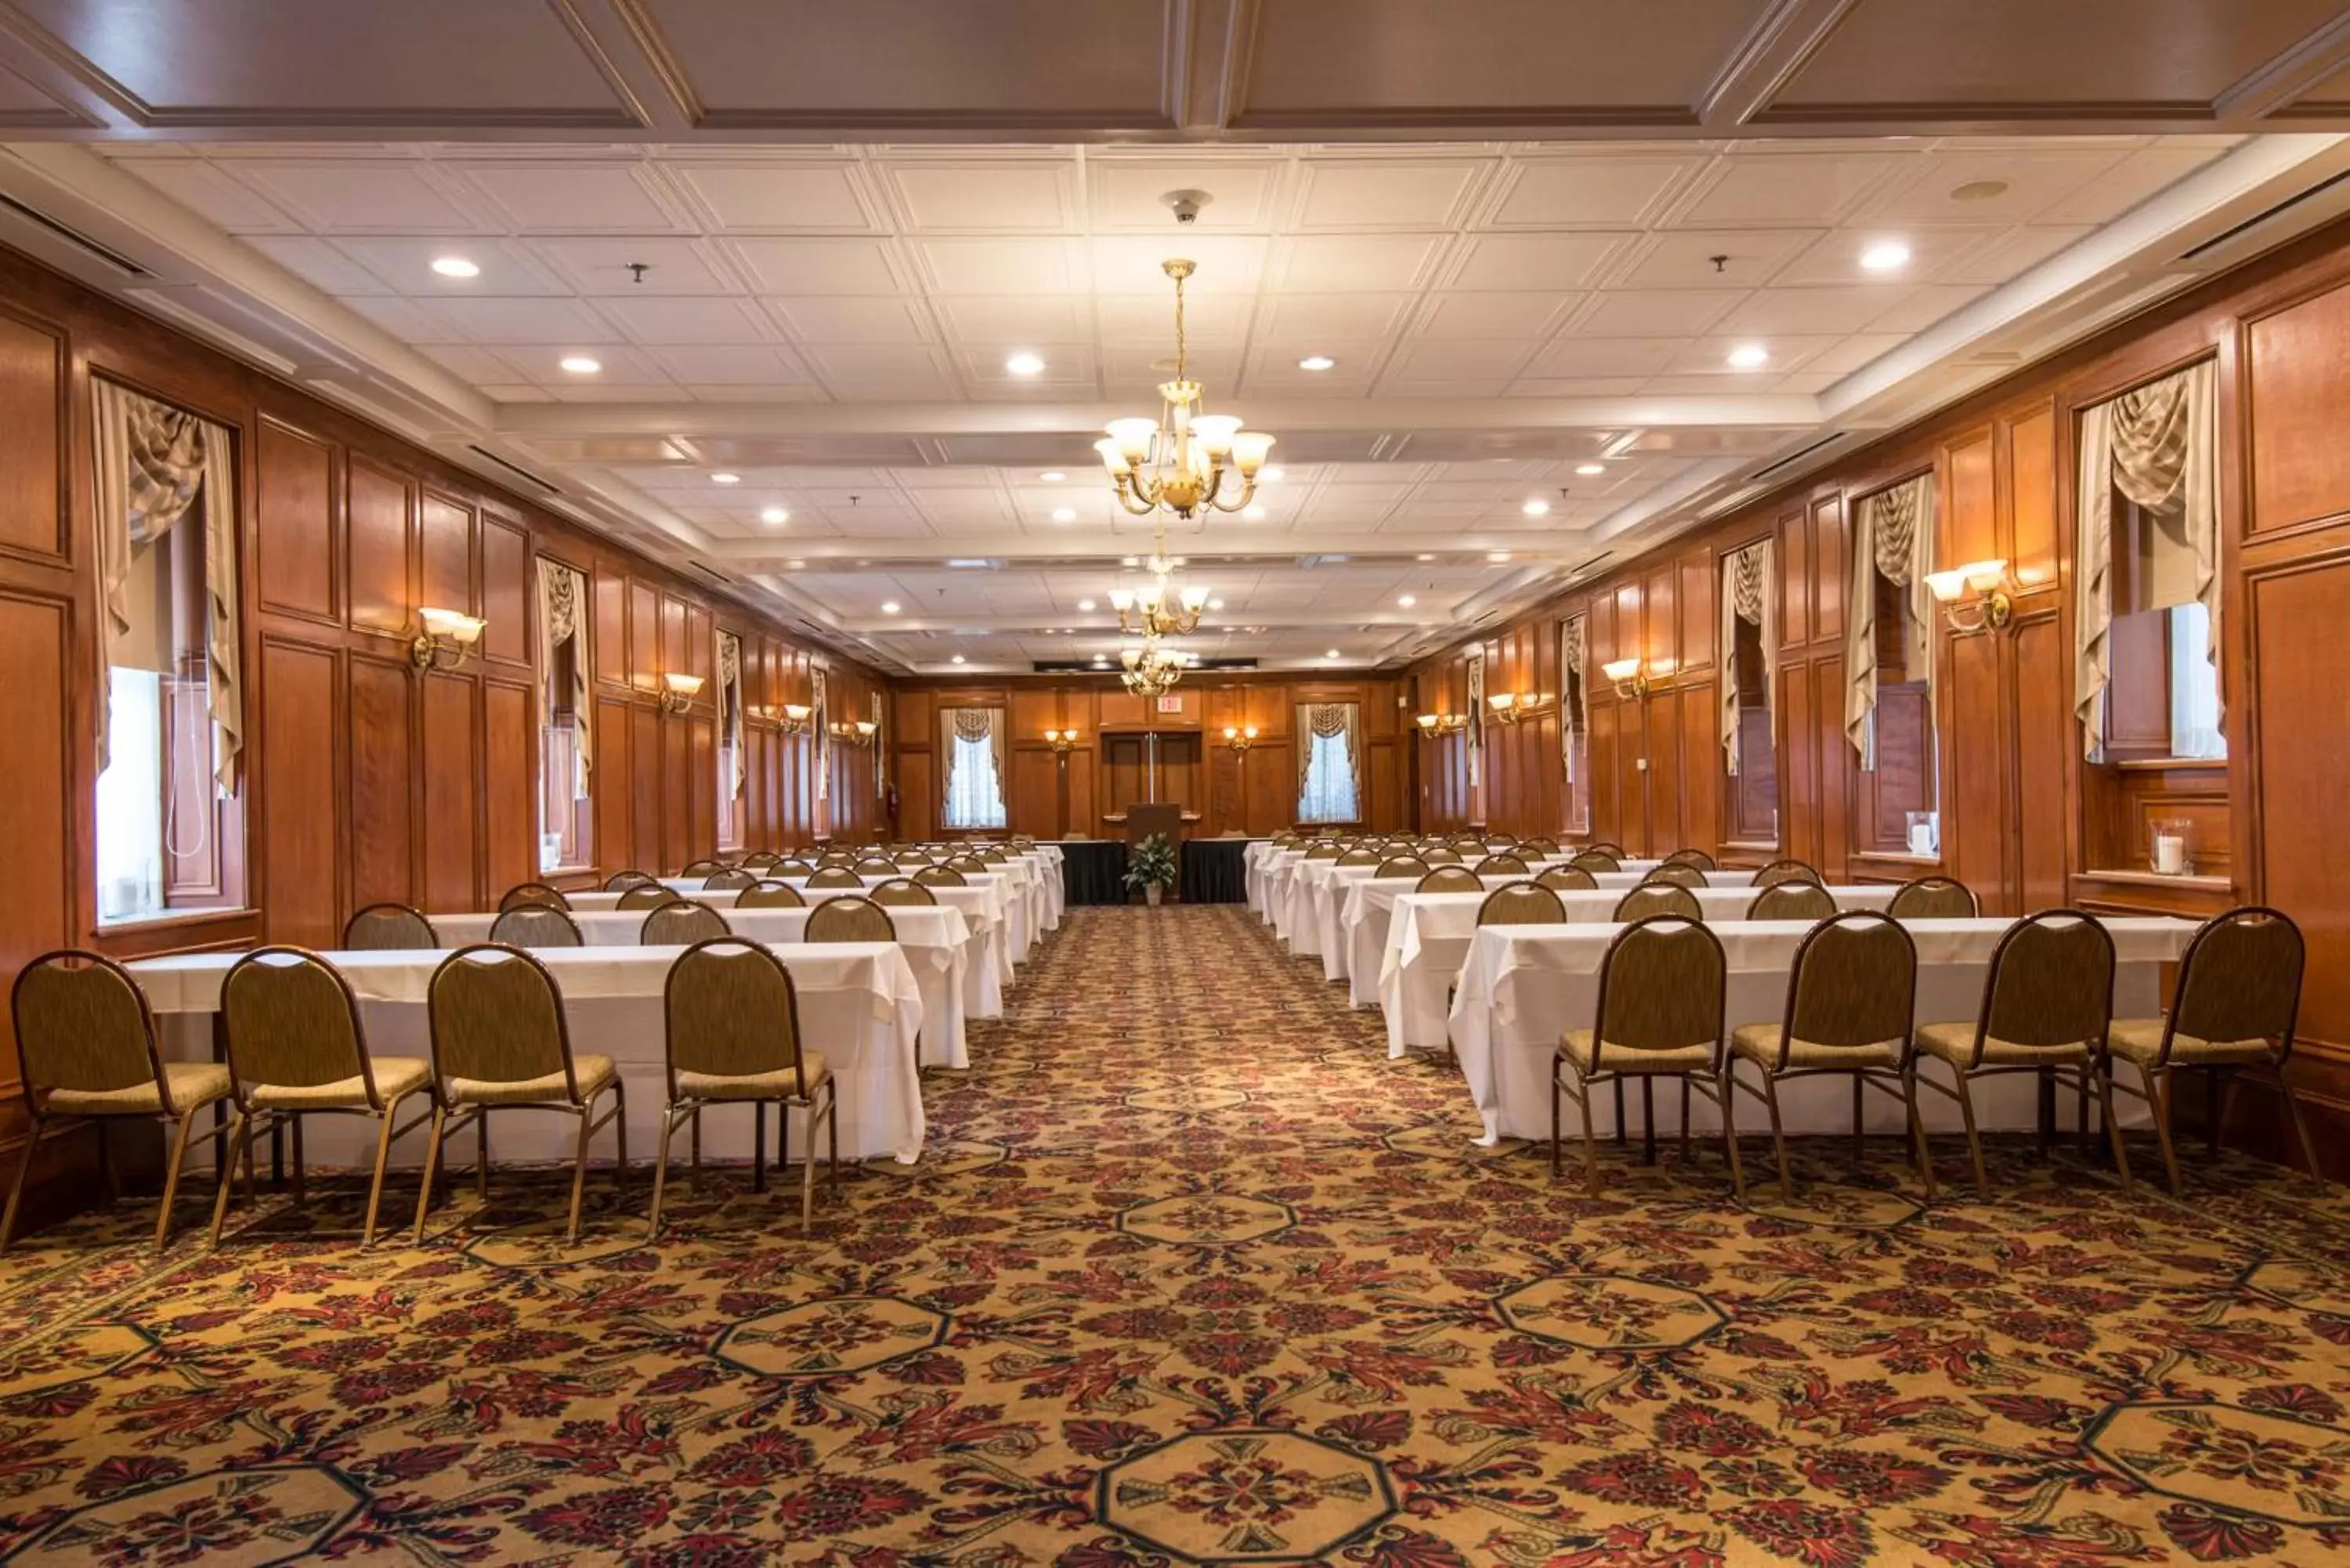 Meeting/conference room, Banquet Facilities in Fort Harrison State Park Inn